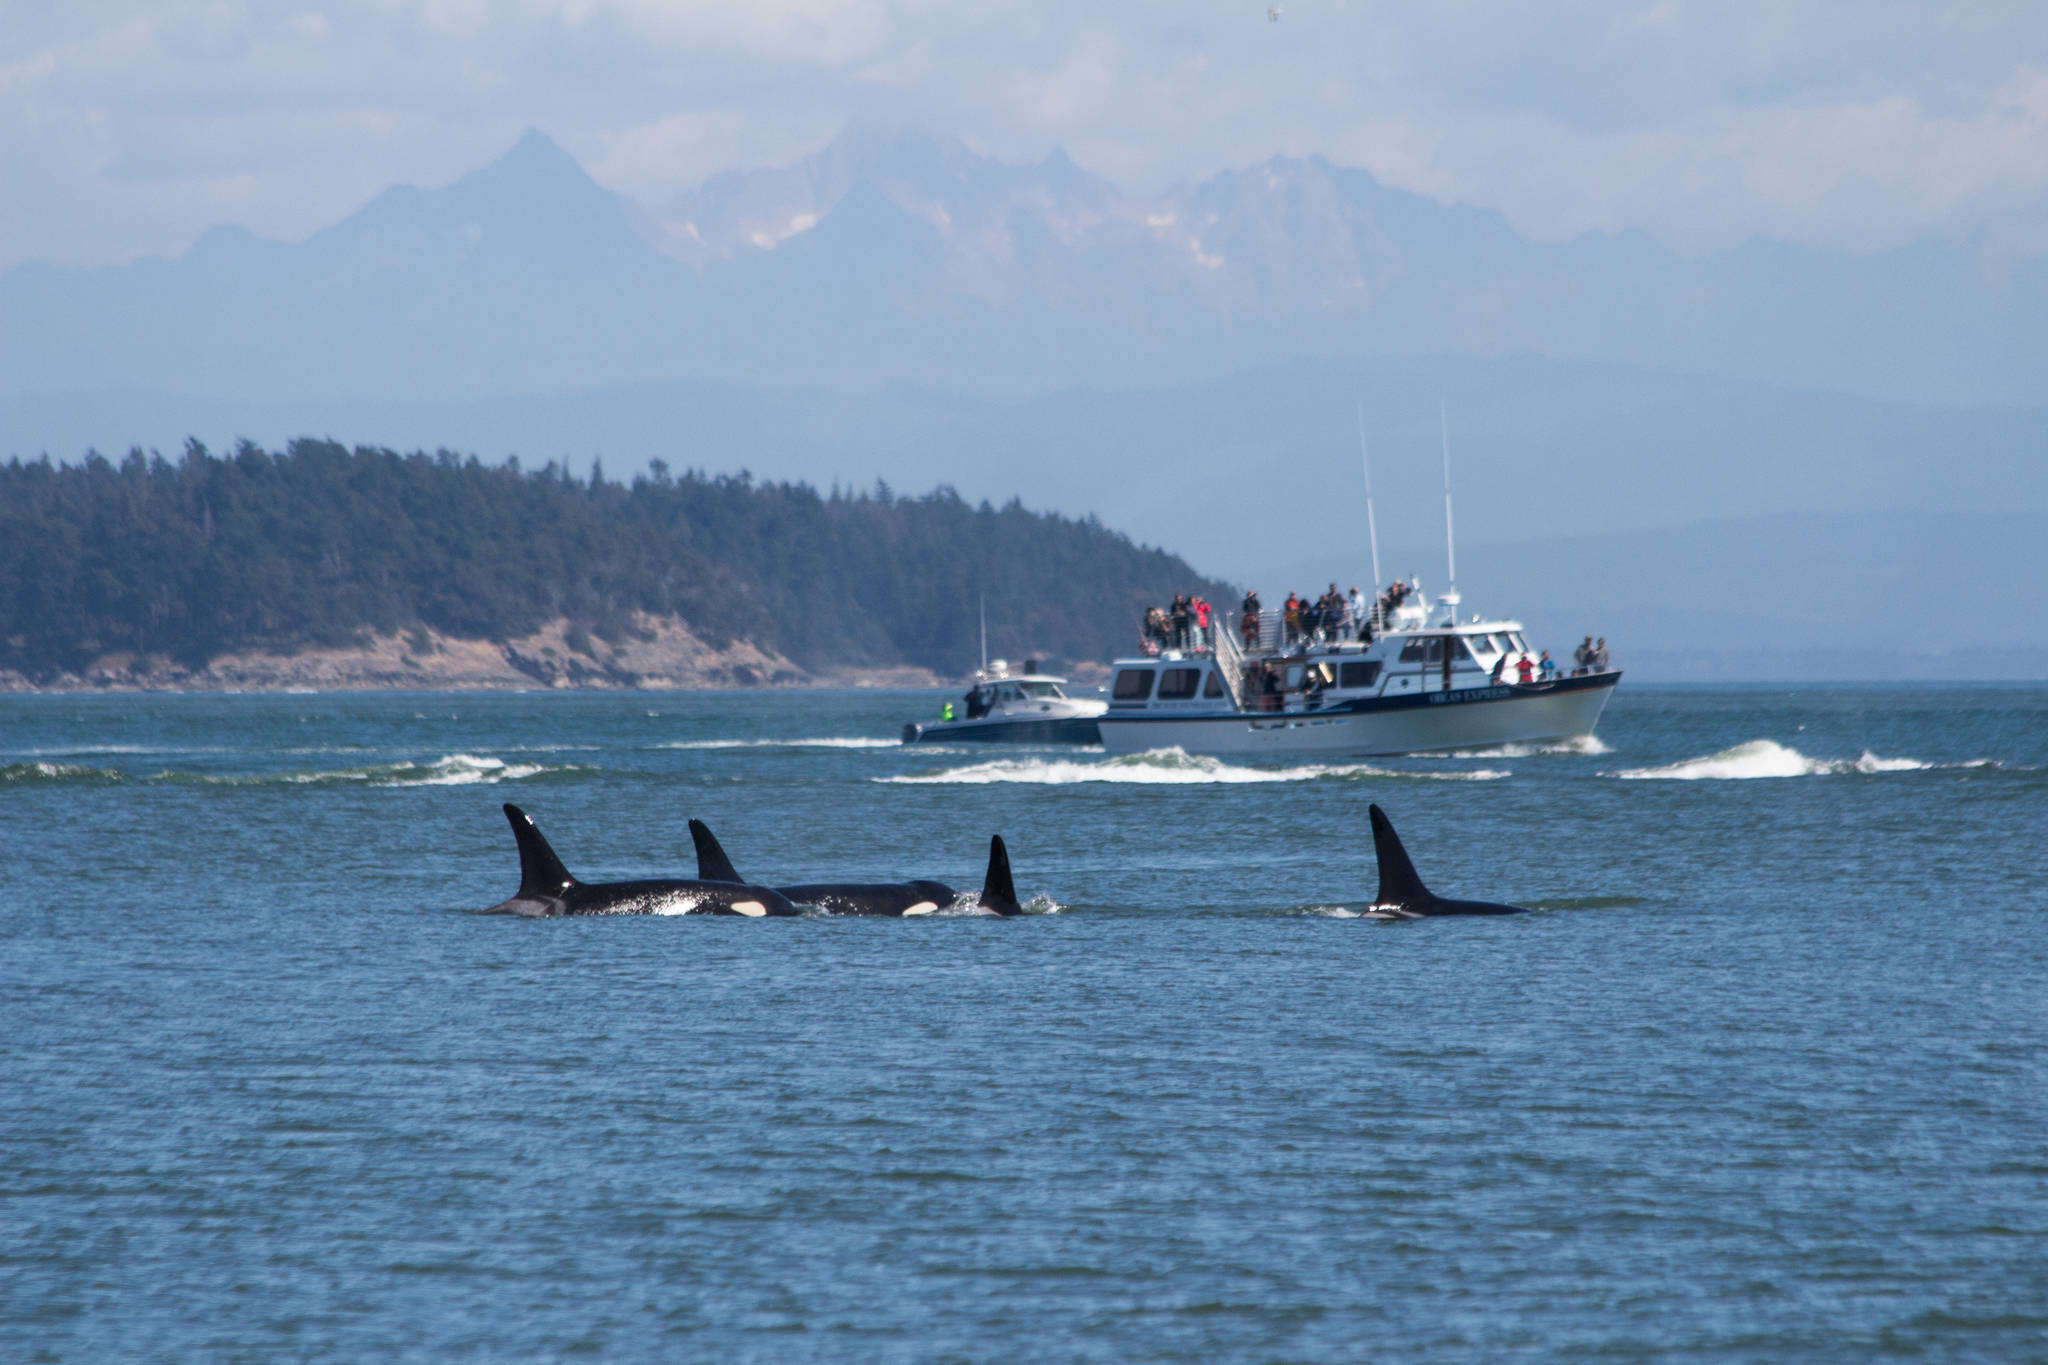 Whale watchers oppose distance initiative